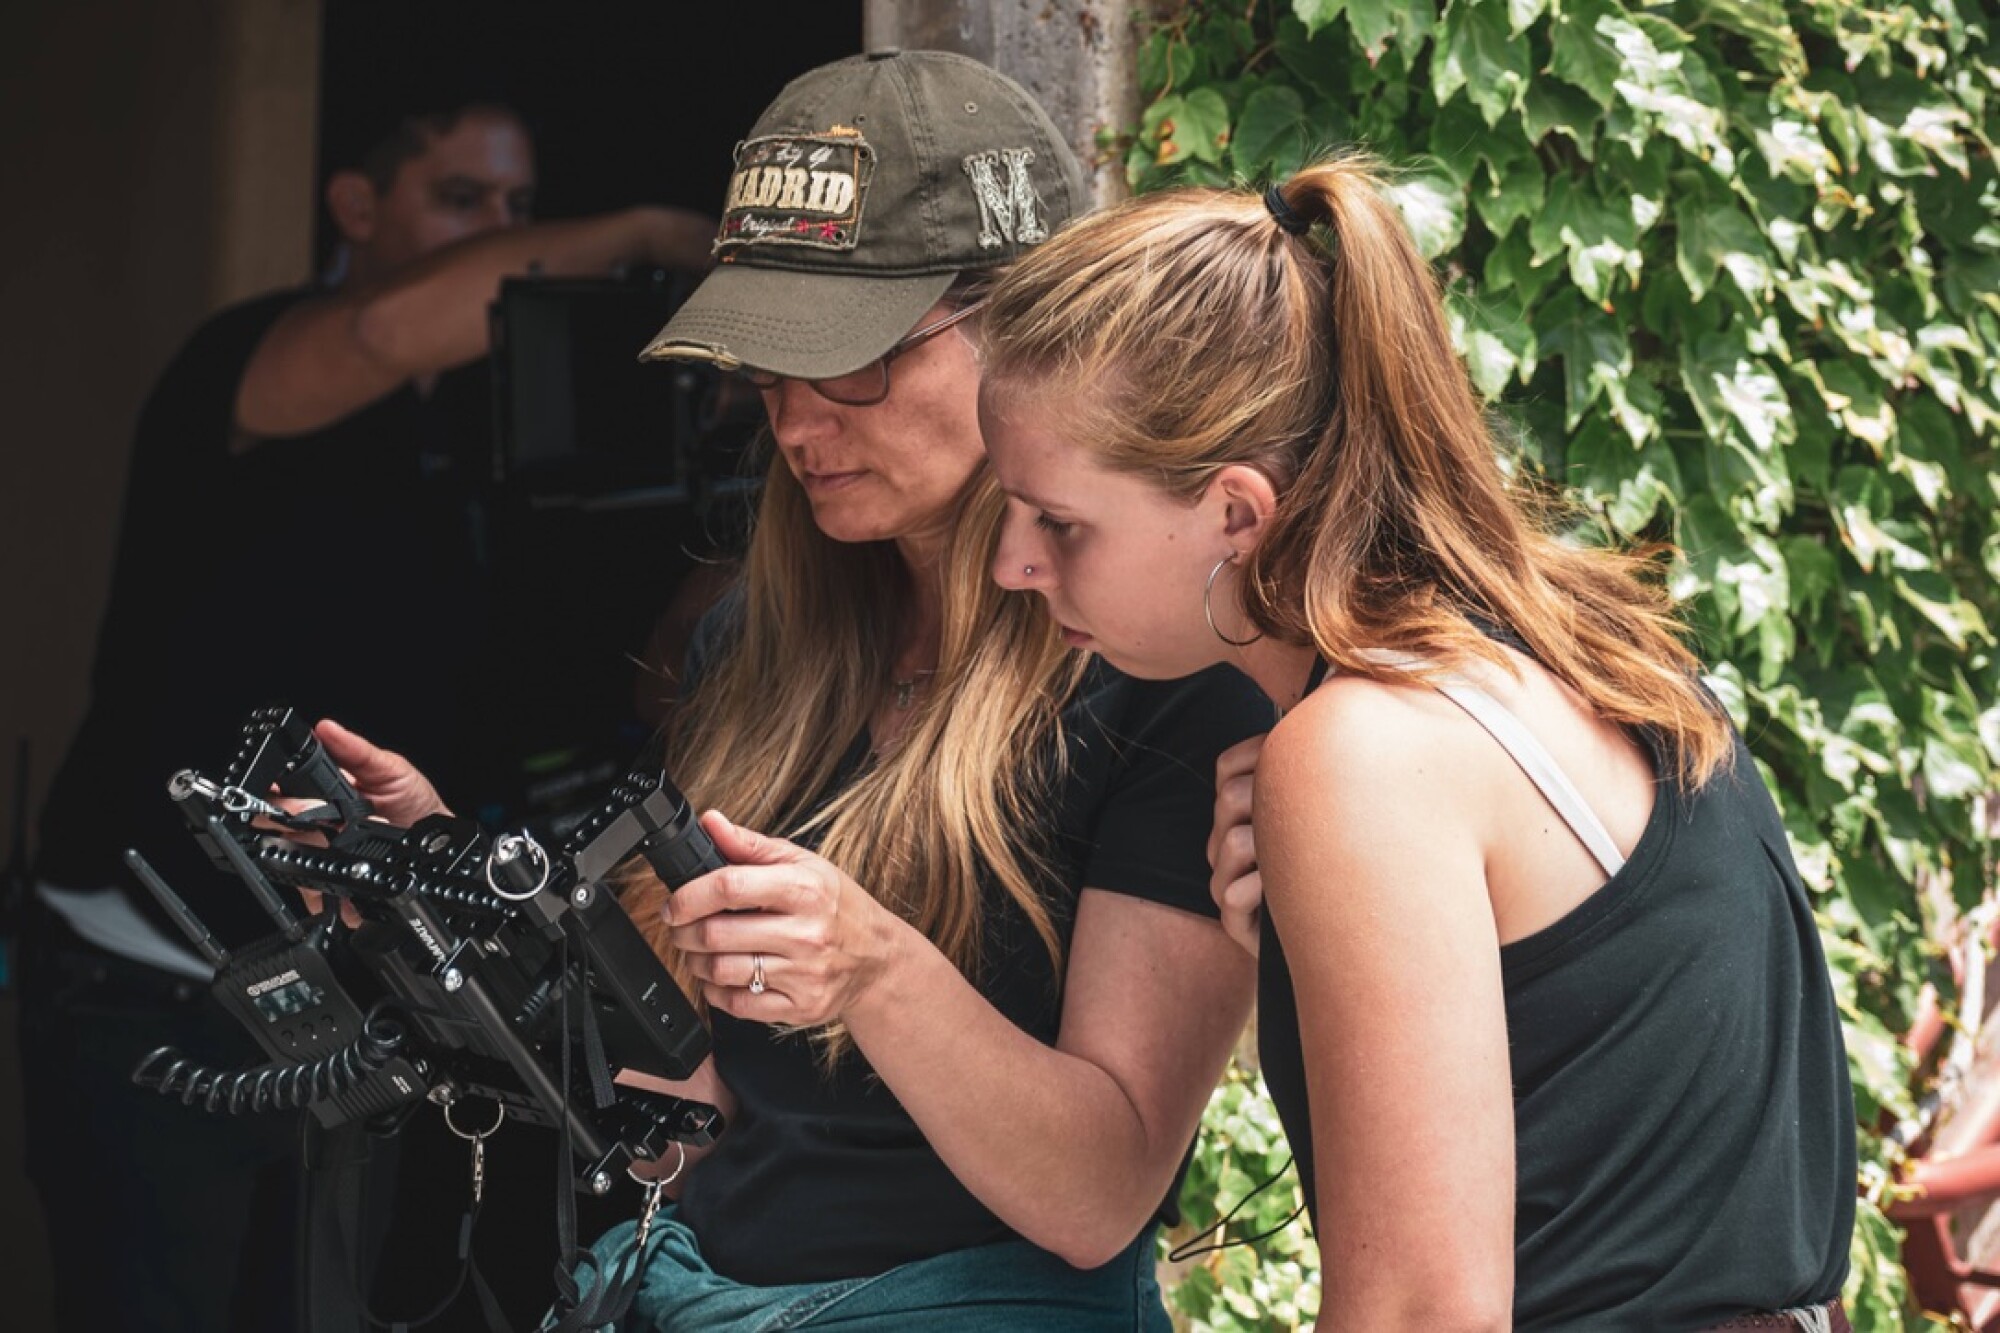 Director Maggie Mart (left) examines footage of Katie Gerlach during filming "Oh, quarrelsome love!"